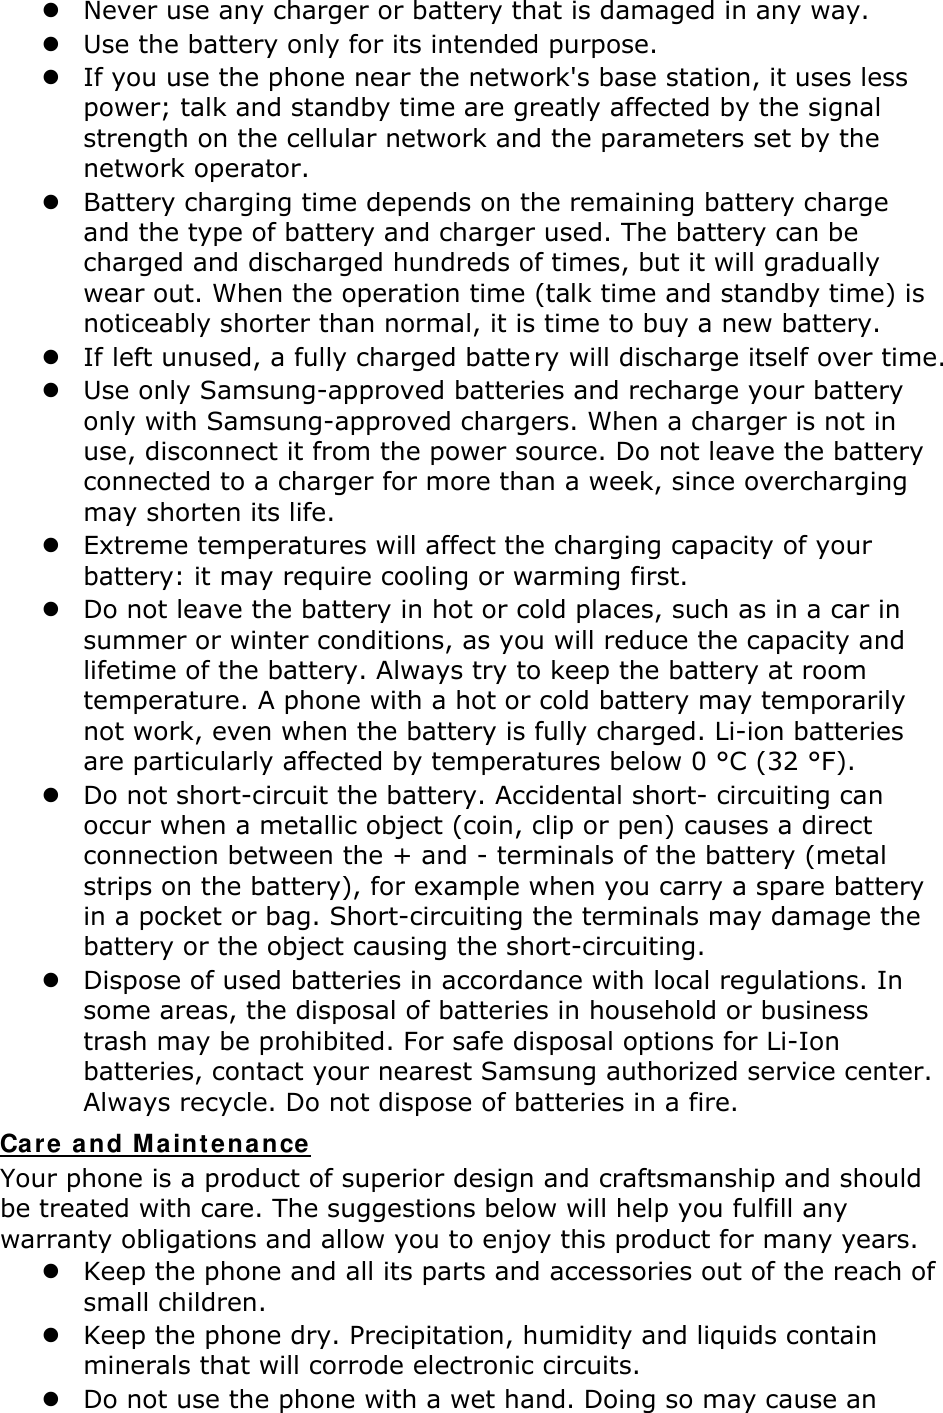 z Never use any charger or battery that is damaged in any way. z Use the battery only for its intended purpose. z If you use the phone near the network&apos;s base station, it uses less power; talk and standby time are greatly affected by the signal strength on the cellular network and the parameters set by the network operator. z Battery charging time depends on the remaining battery charge and the type of battery and charger used. The battery can be charged and discharged hundreds of times, but it will gradually wear out. When the operation time (talk time and standby time) is noticeably shorter than normal, it is time to buy a new battery. z If left unused, a fully charged batte ry will discharge itself over time.  z Use only Samsung-approved batteries and recharge your battery only with Samsung-approved chargers. When a charger is not in use, disconnect it from the power source. Do not leave the battery connected to a charger for more than a week, since overcharging may shorten its life. z Extreme temperatures will affect the charging capacity of your battery: it may require cooling or warming first. z Do not leave the battery in hot or cold places, such as in a car in summer or winter conditions, as you will reduce the capacity and lifetime of the battery. Always try to keep the battery at room temperature. A phone with a hot or cold battery may temporarily not work, even when the battery is fully charged. Li-ion batteries are particularly affected by temperatures below 0 °C (32 °F). z Do not short-circuit the battery. Accidental short- circuiting can occur when a metallic object (coin, clip or pen) causes a direct connection between the + and - terminals of the battery (metal strips on the battery), for example when you carry a spare battery in a pocket or bag. Short-circuiting the terminals may damage the battery or the object causing the short-circuiting. z Dispose of used batteries in accordance with local regulations. In some areas, the disposal of batteries in household or business trash may be prohibited. For safe disposal options for Li-Ion batteries, contact your nearest Samsung authorized service center. Always recycle. Do not dispose of batteries in a fire. Care and Mainte na nce  Your phone is a product of superior design and craftsmanship and should be treated with care. The suggestions below will help you fulfill any warranty obligations and allow you to enjoy this product for many years. z Keep the phone and all its parts and accessories out of the reach of small children. z Keep the phone dry. Precipitation, humidity and liquids contain minerals that will corrode electronic circuits. z Do not use the phone with a wet hand. Doing so may cause an 